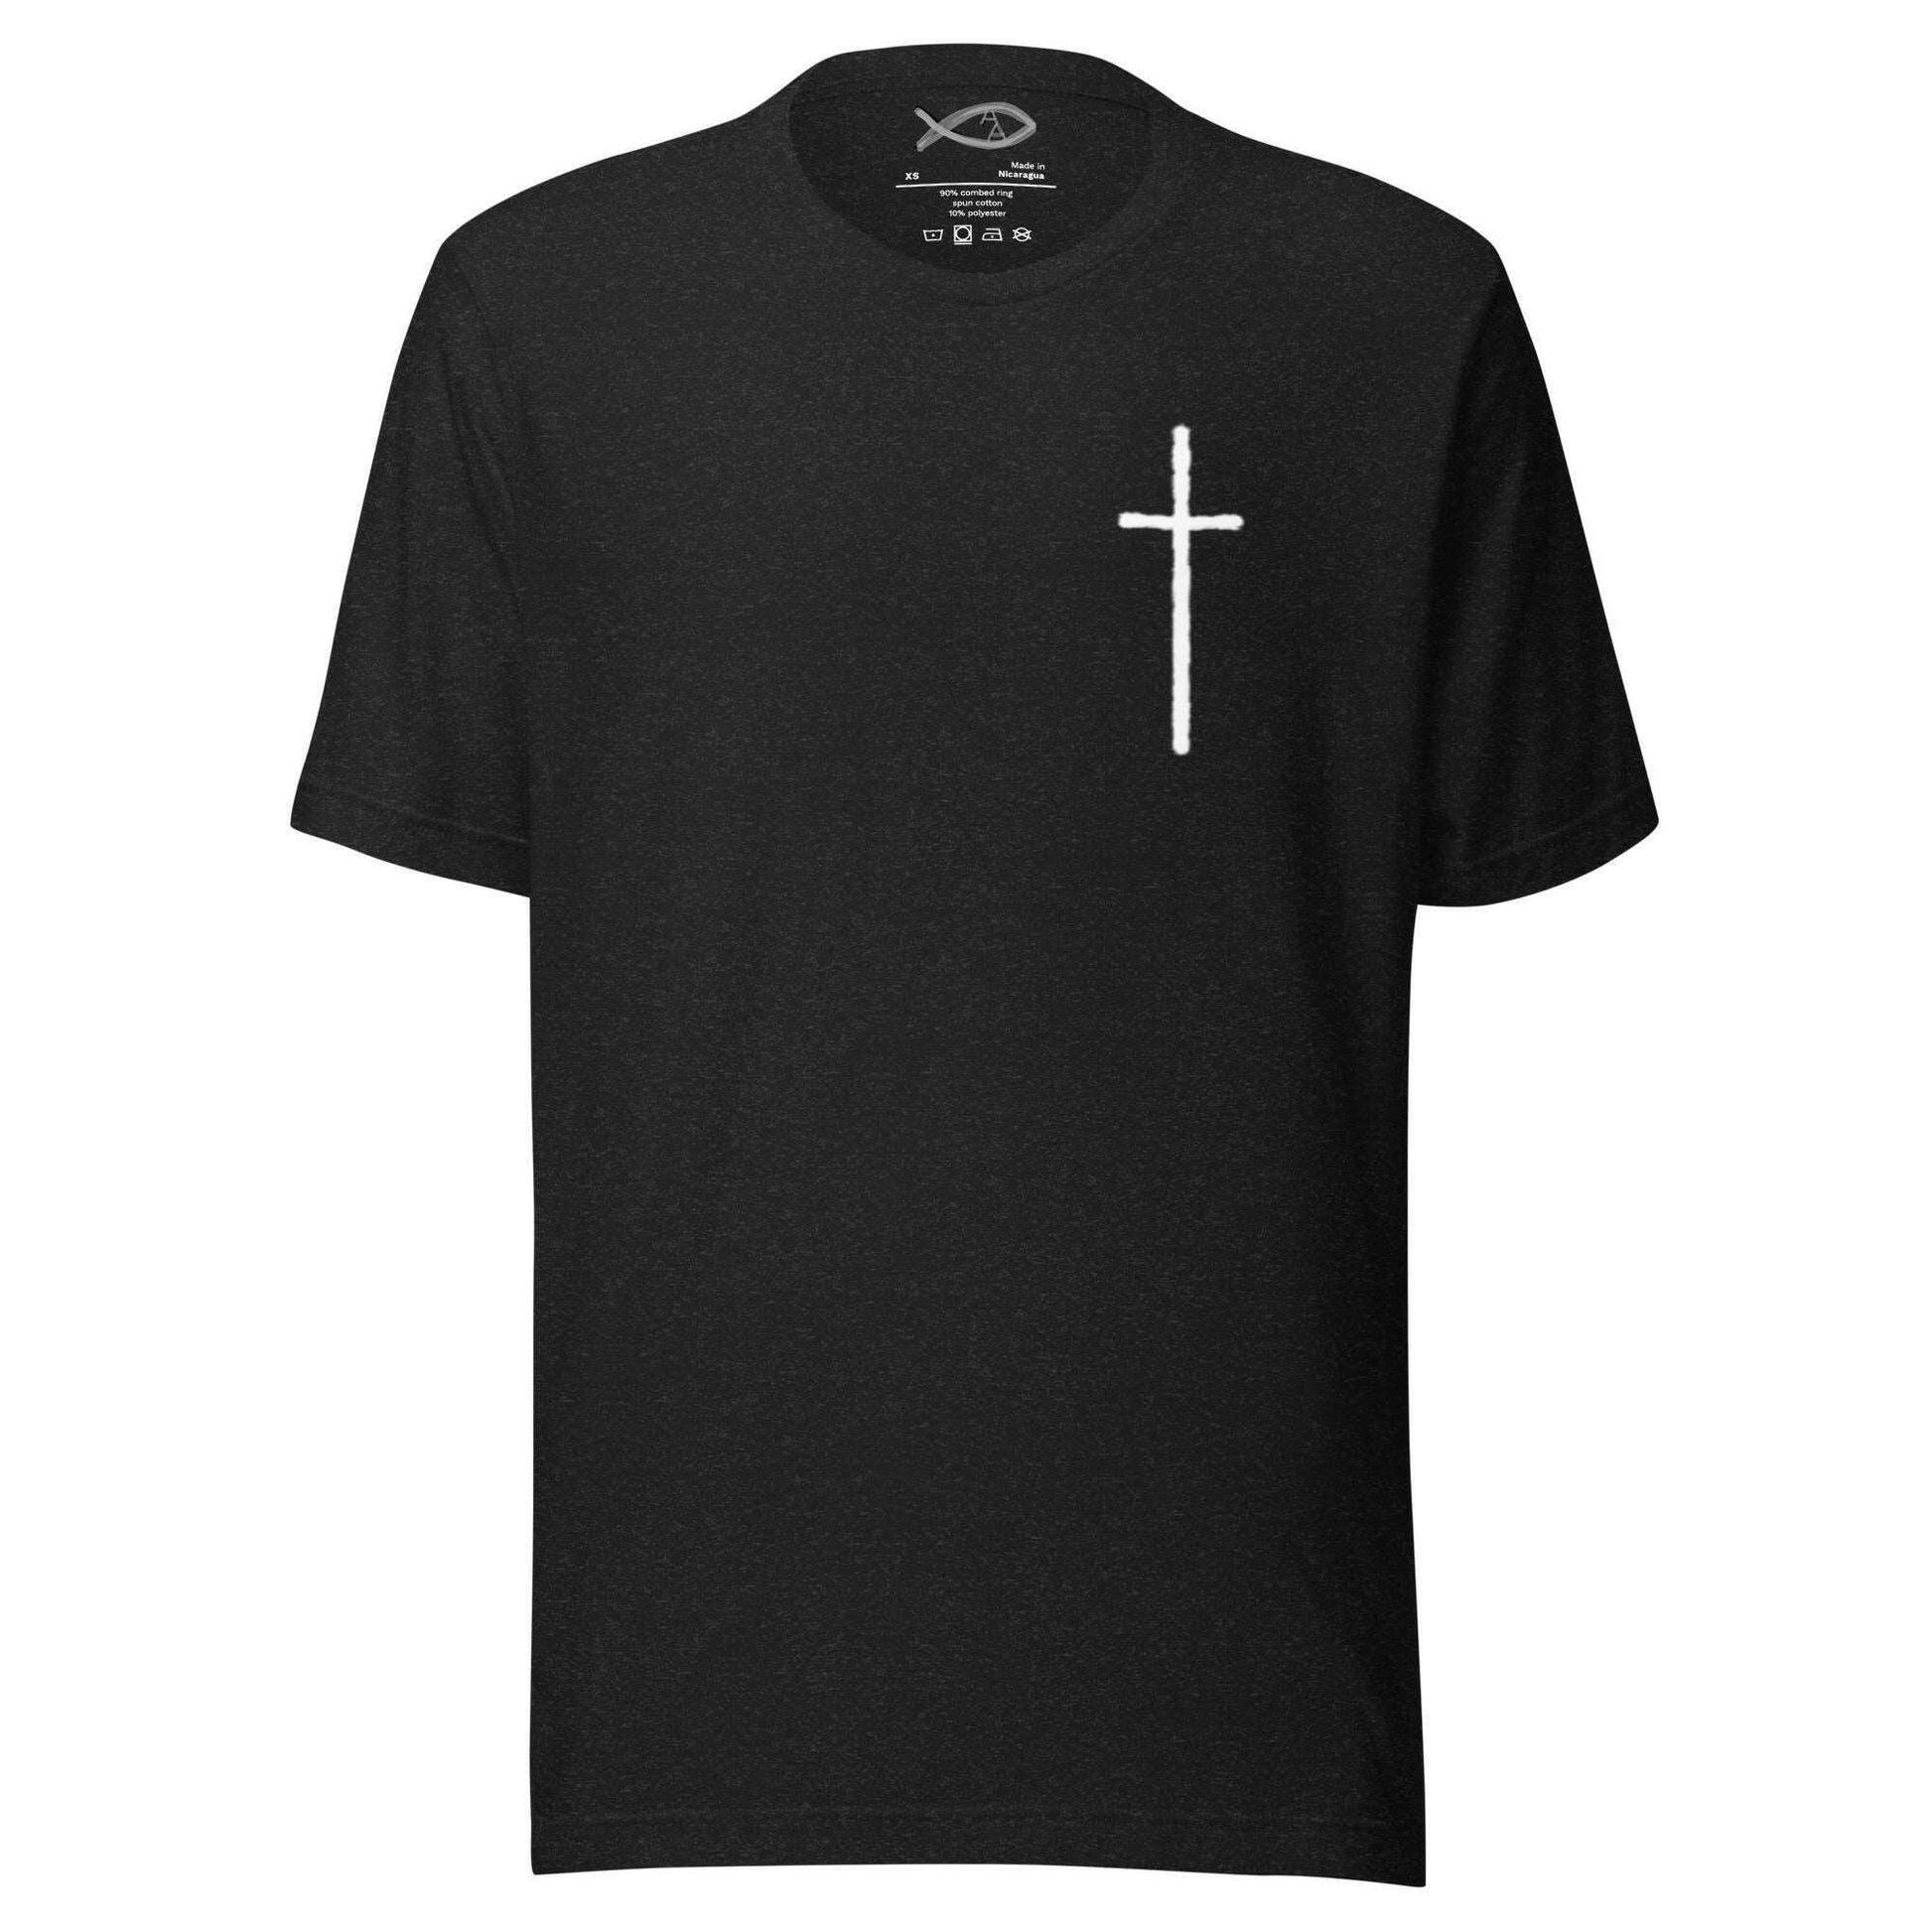 Almighty Apparel - Unisex t-shirt